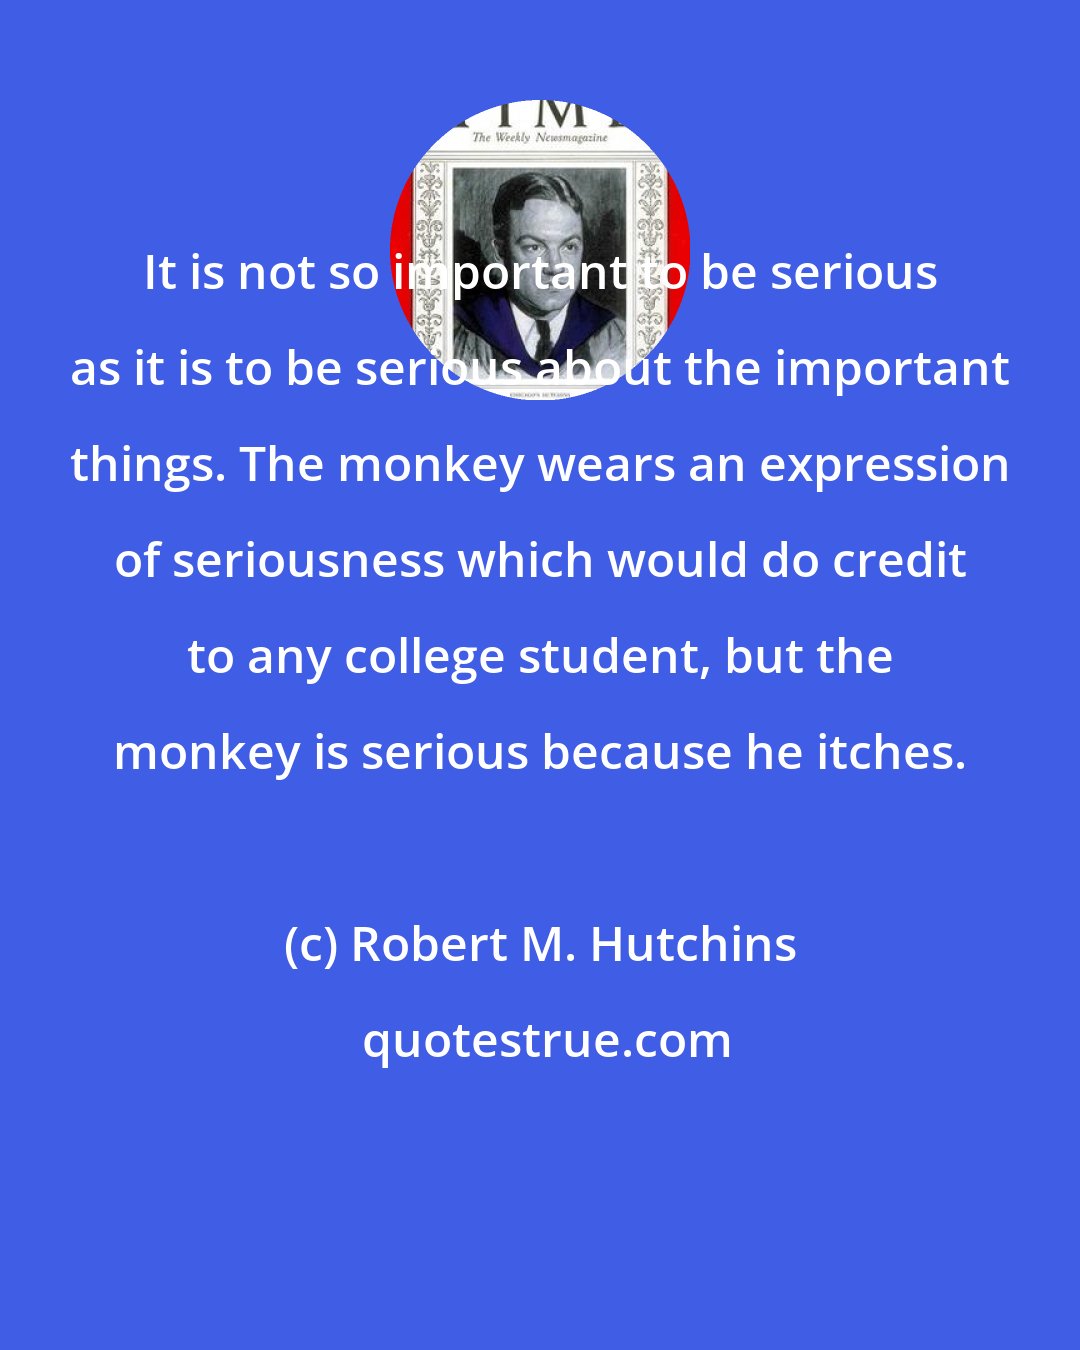 Robert M. Hutchins: It is not so important to be serious as it is to be serious about the important things. The monkey wears an expression of seriousness which would do credit to any college student, but the monkey is serious because he itches.